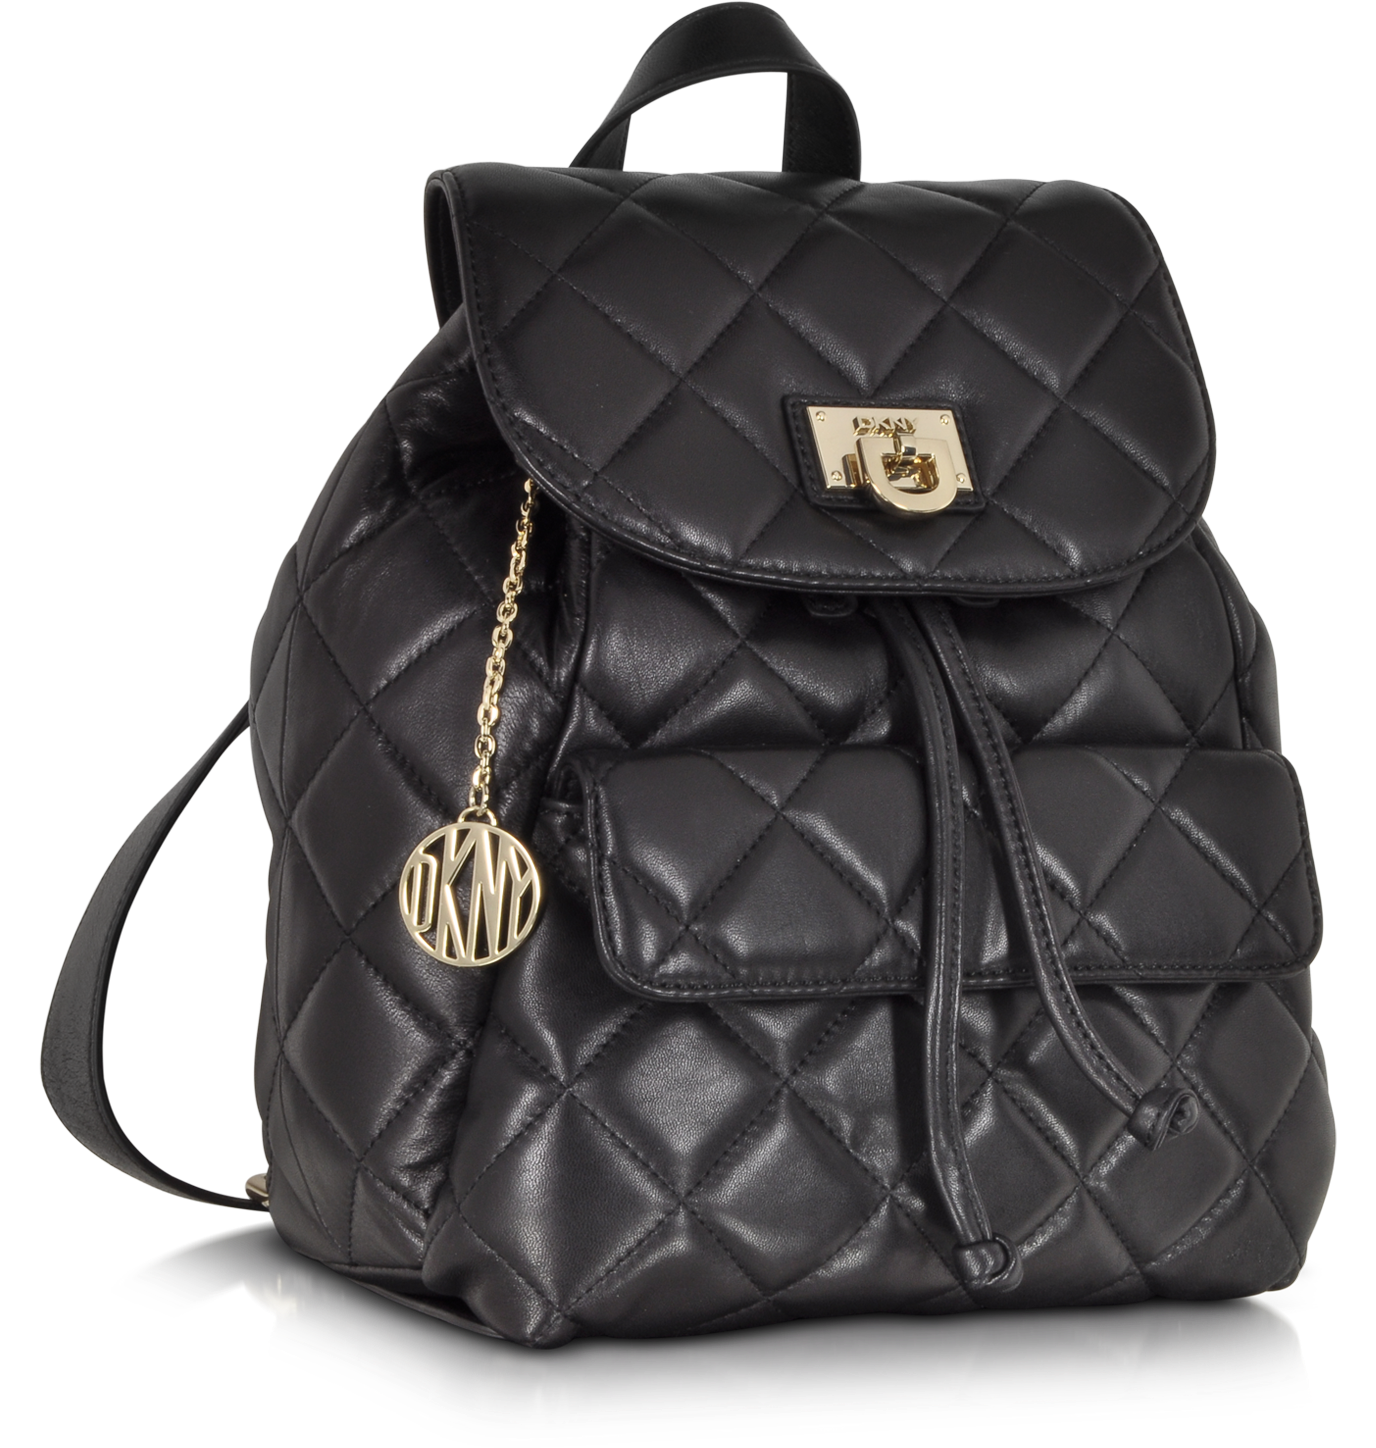 DKNY Sand Gansevoort Quilted Nappa Leather Backpack at FORZIERI